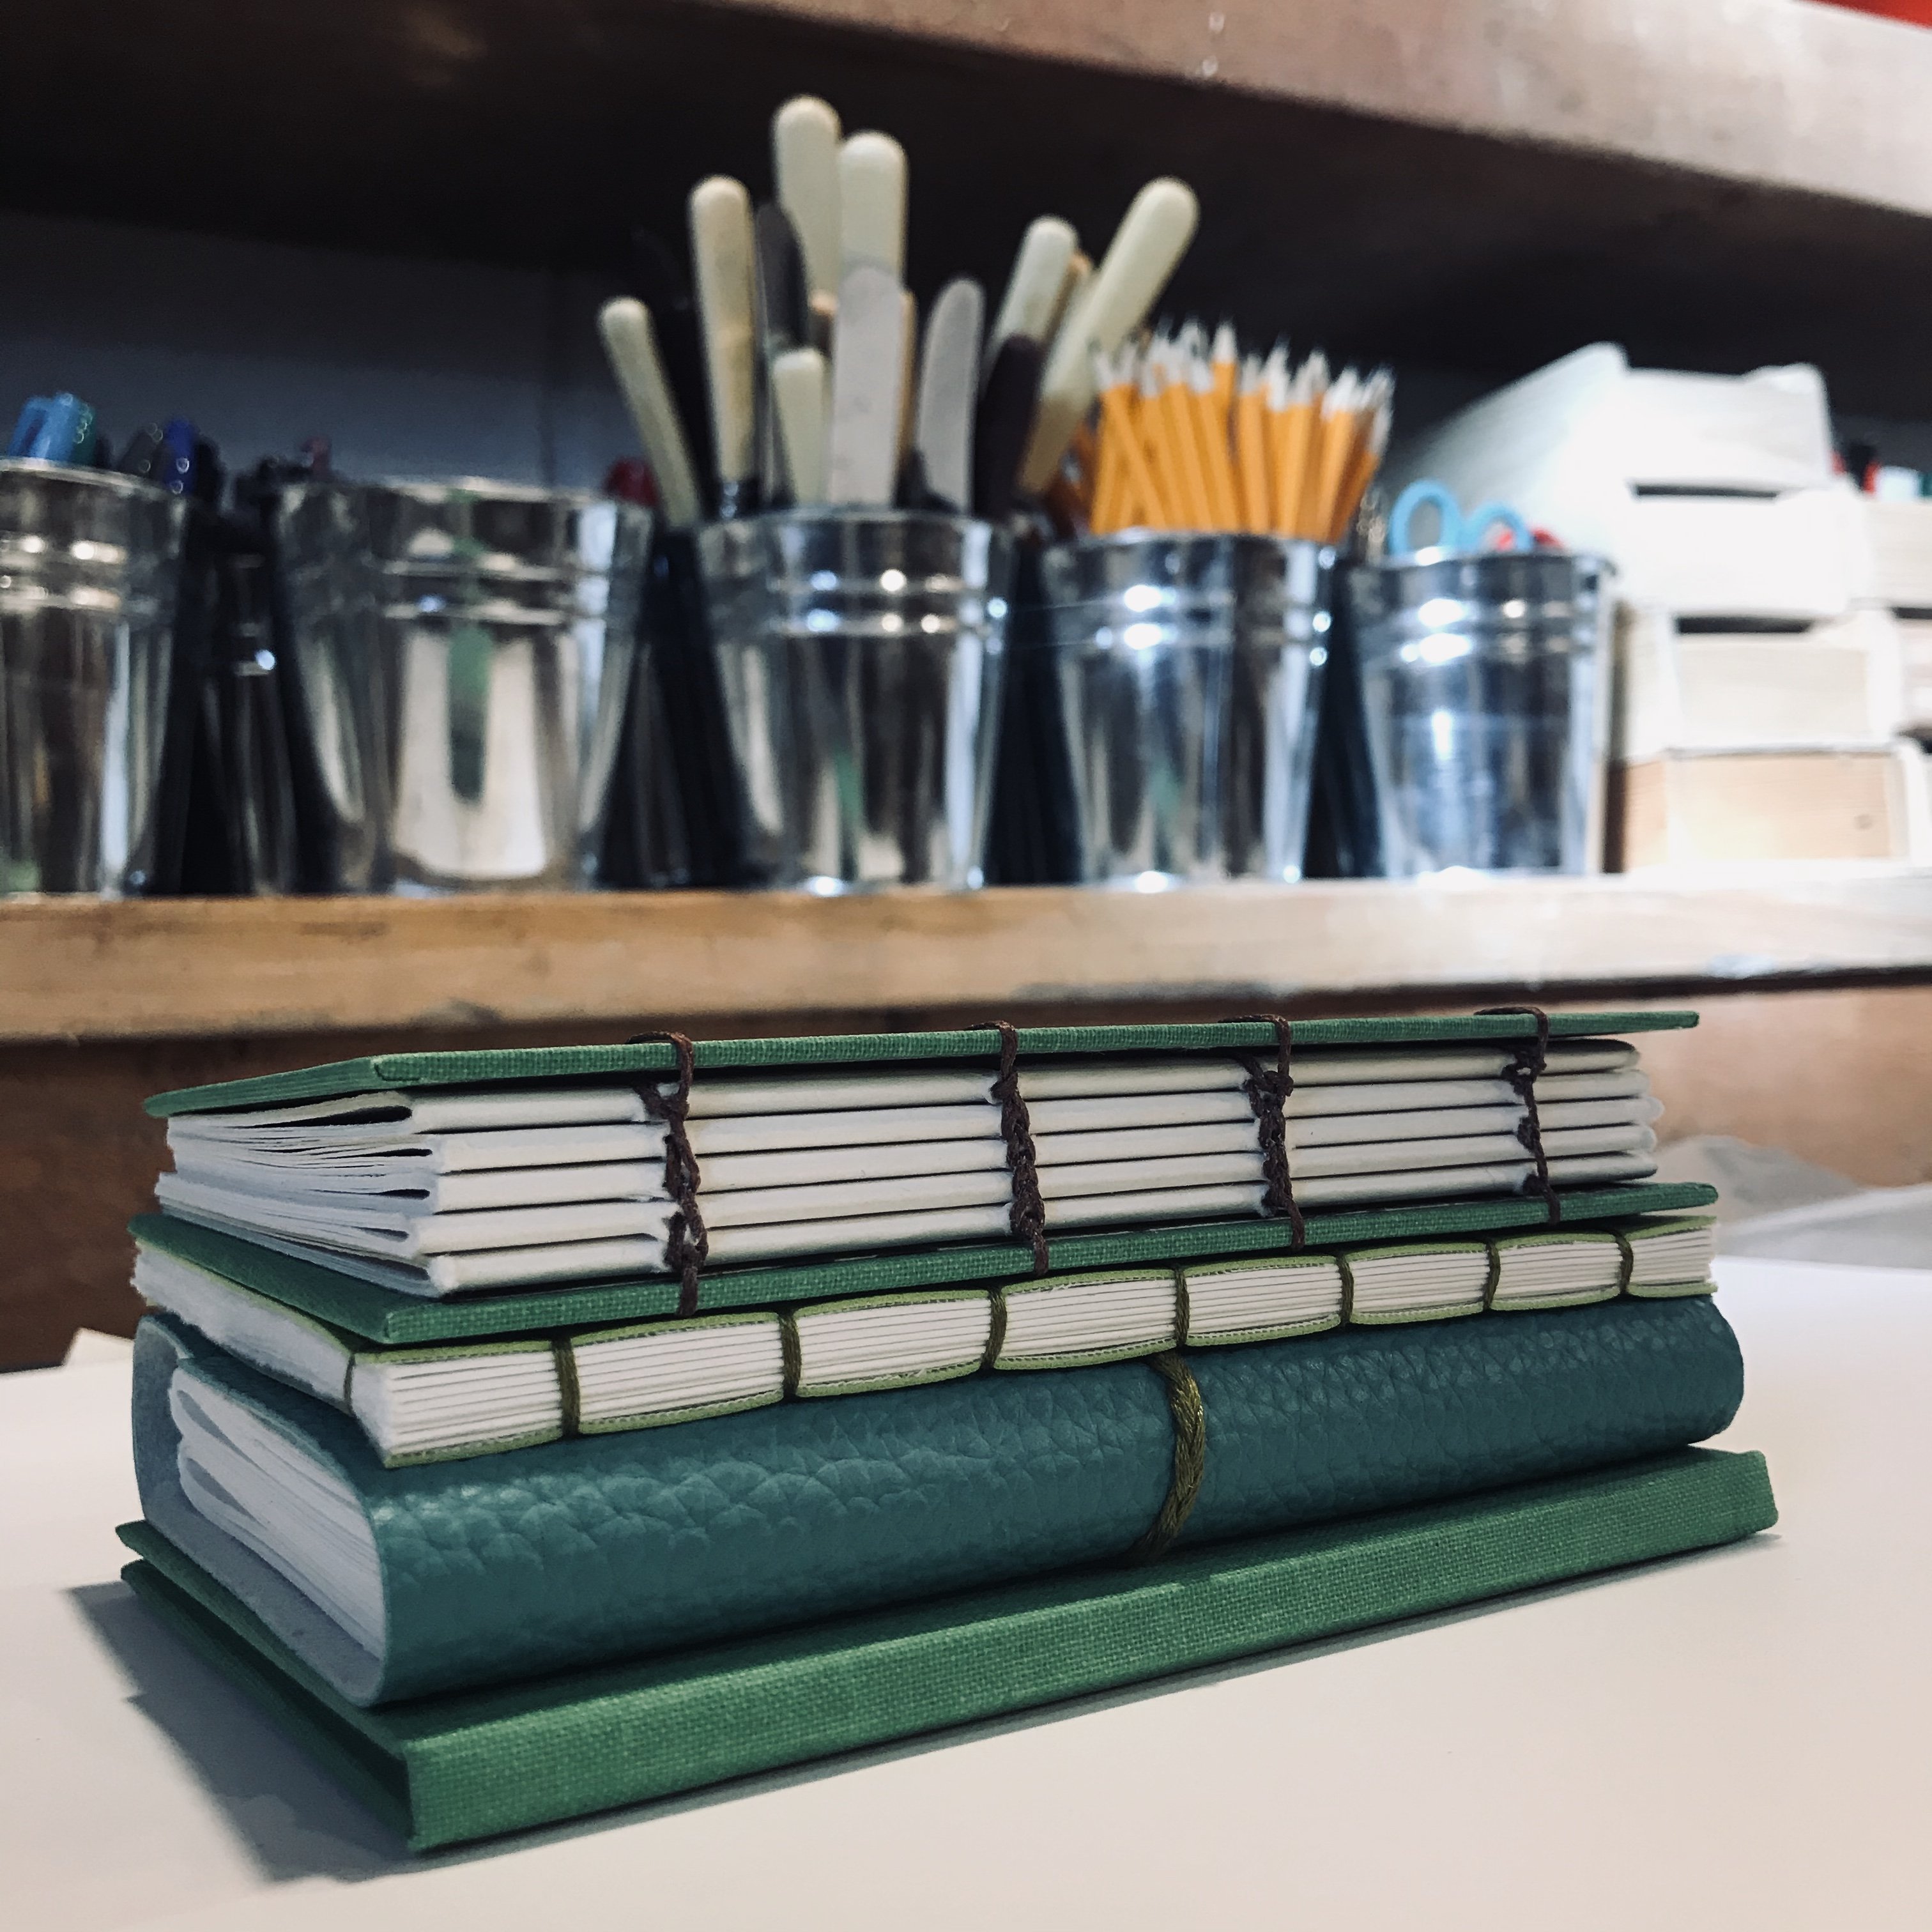 Beginner Bookbinding Learn at Home Live with Rachel - One to One - 1 Day